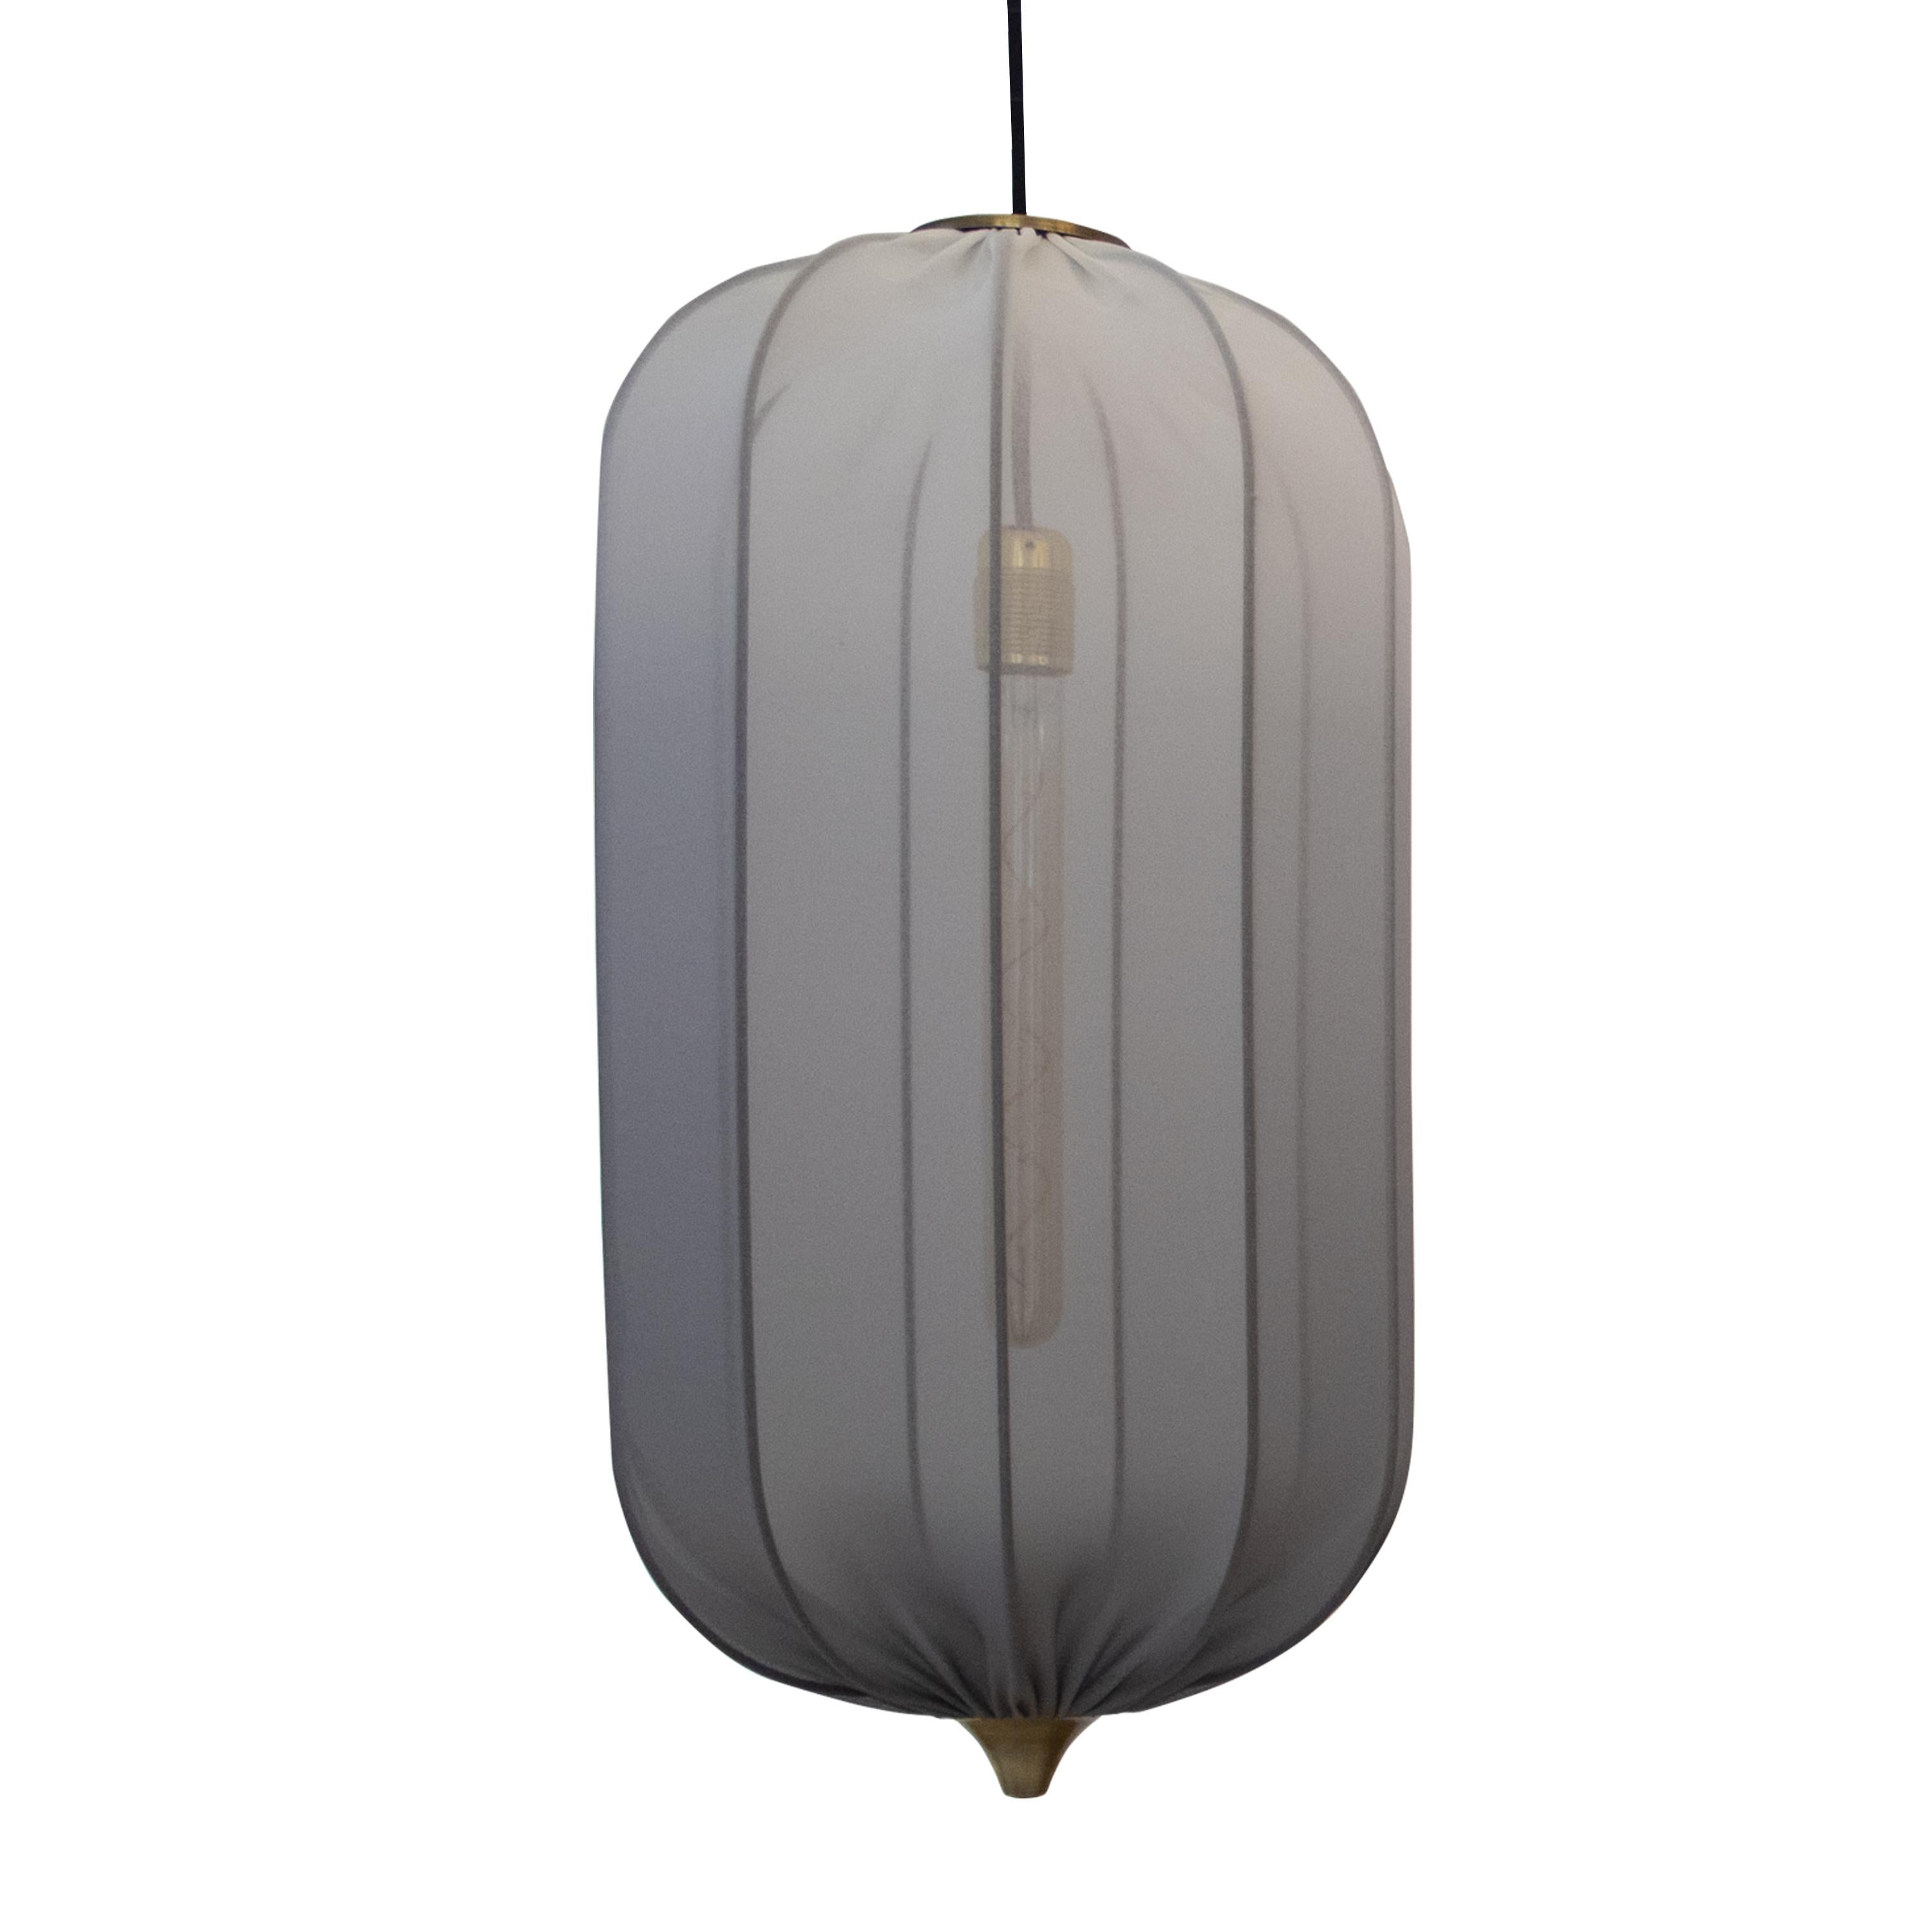 Oval Tulip-shaped ceiling lamp designed by IKB191. The lamp consists of a brass structure upholstered in faded semi-transparent gray elastane adjustable fabric, with brass cone details and a charcoal light bulb.
 